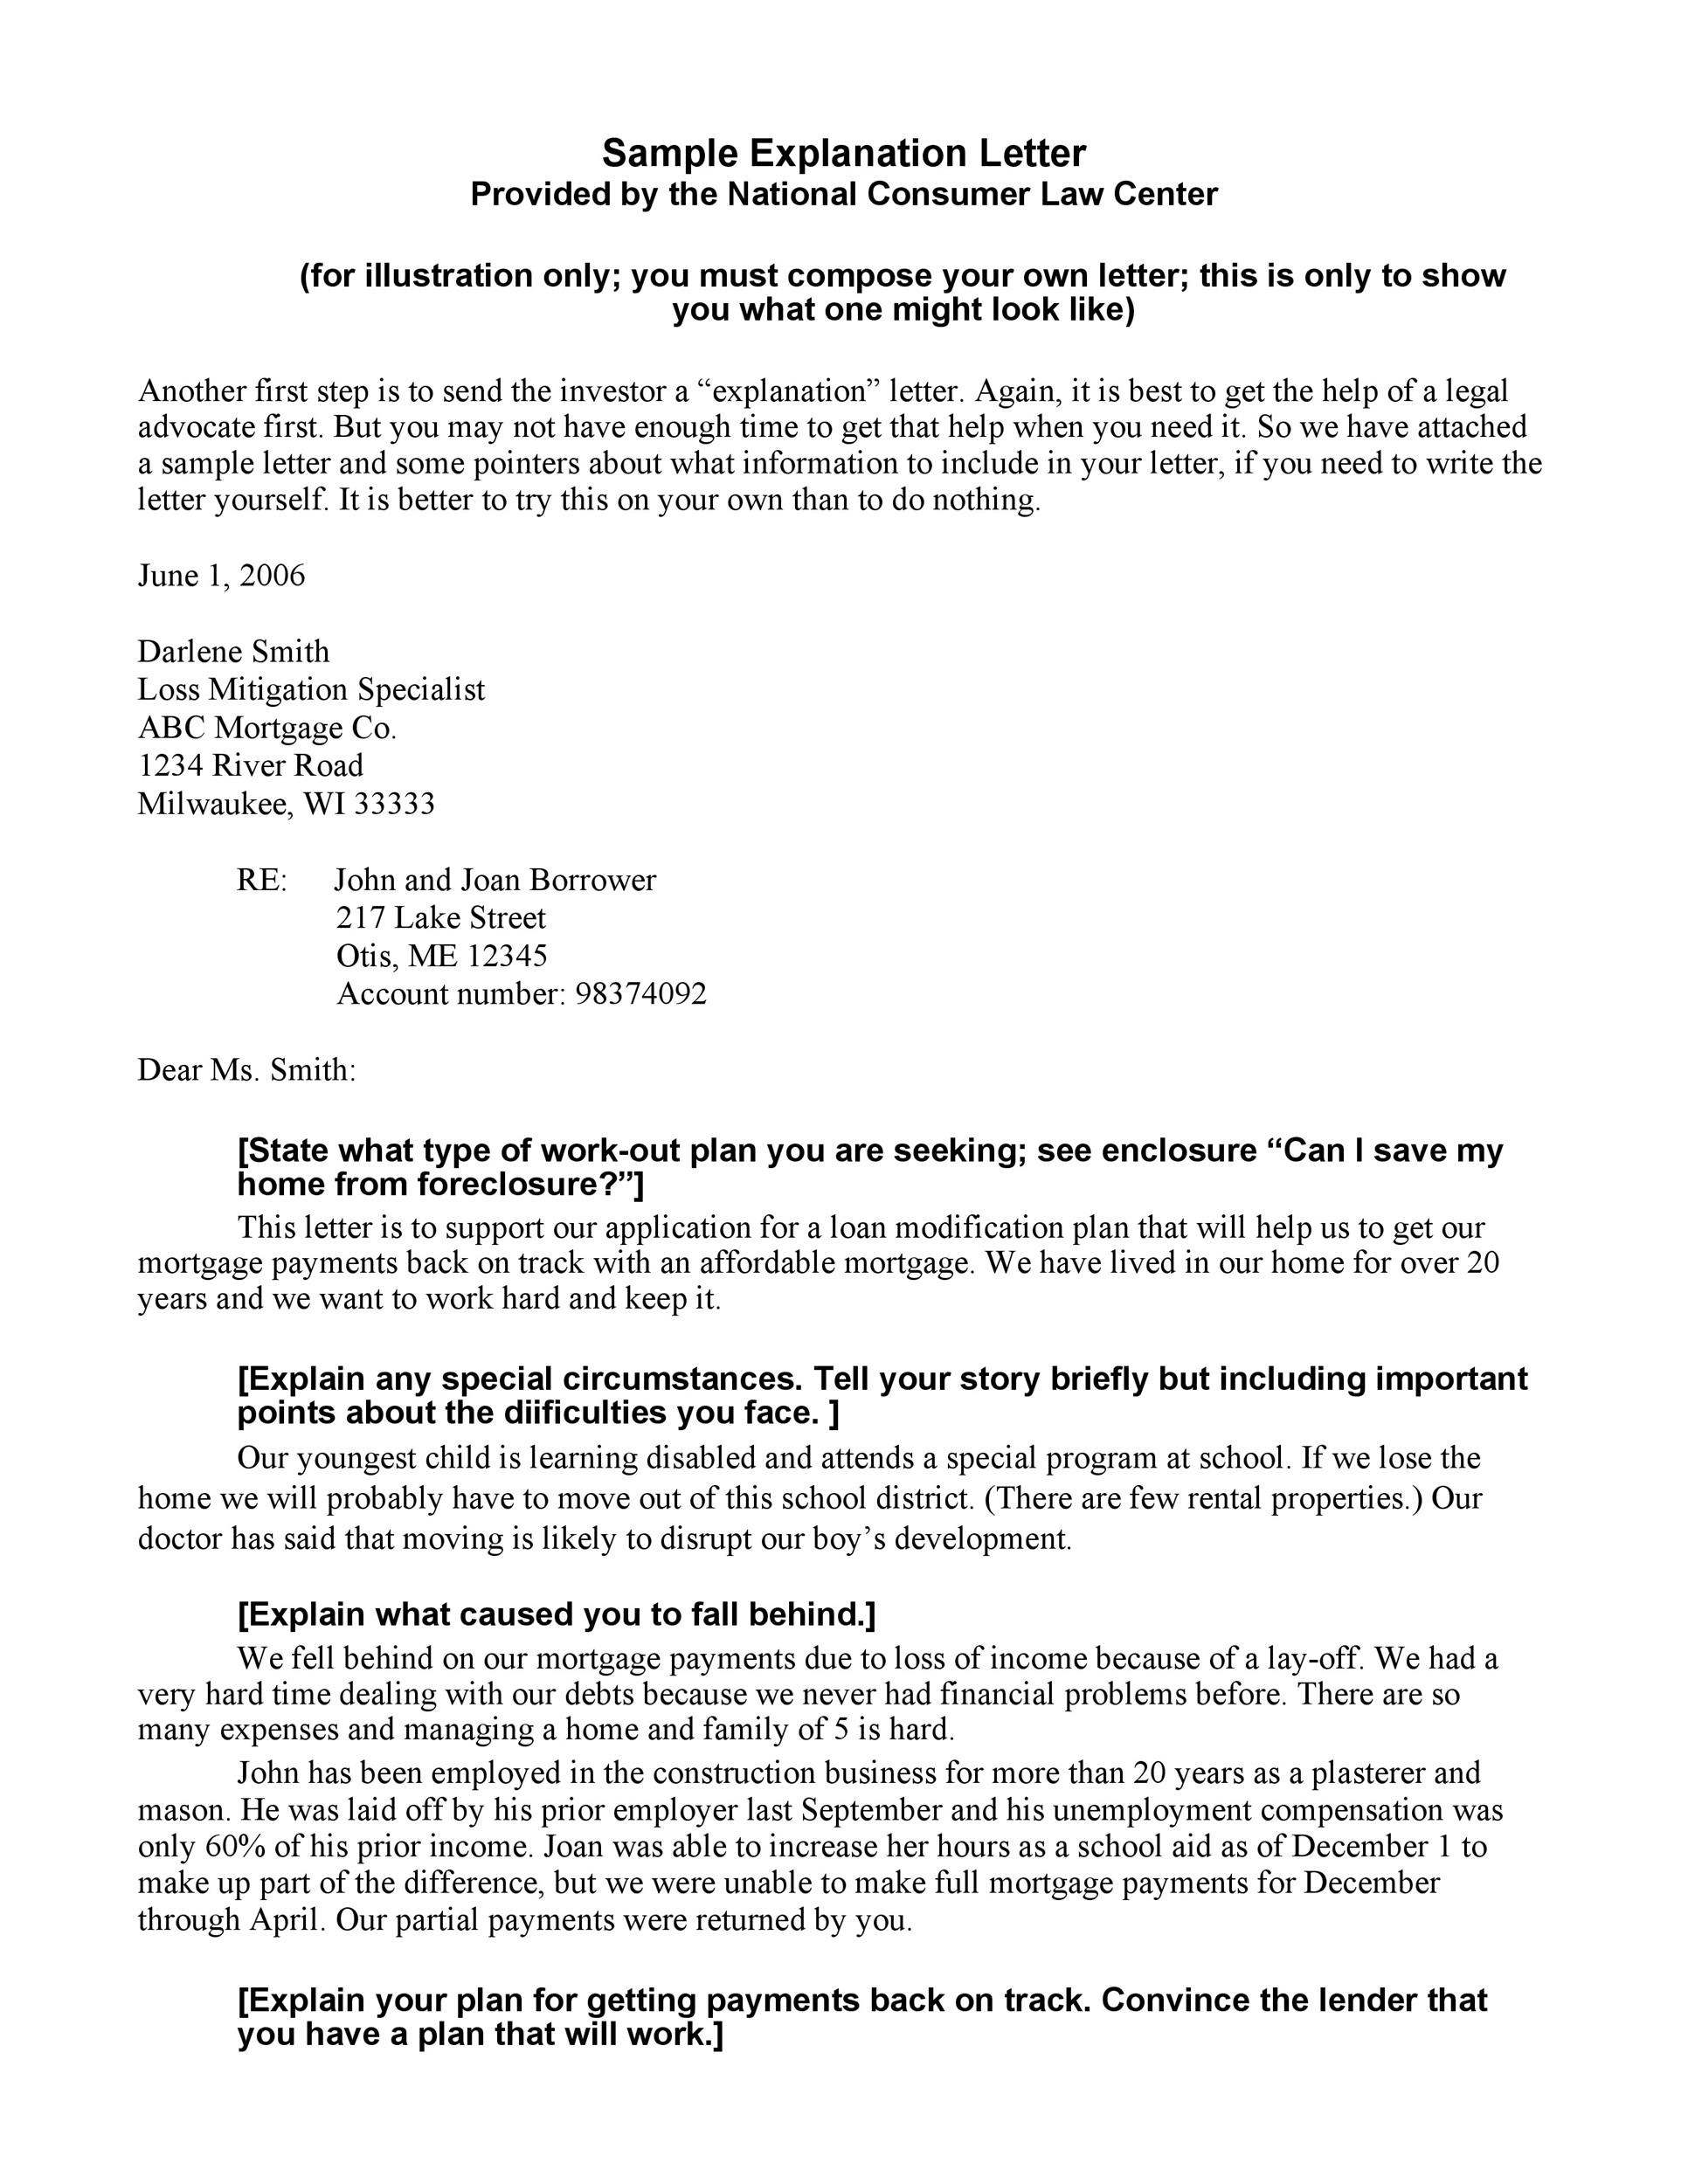 Employment Gap Explanation Letter Sample from templatelab.com